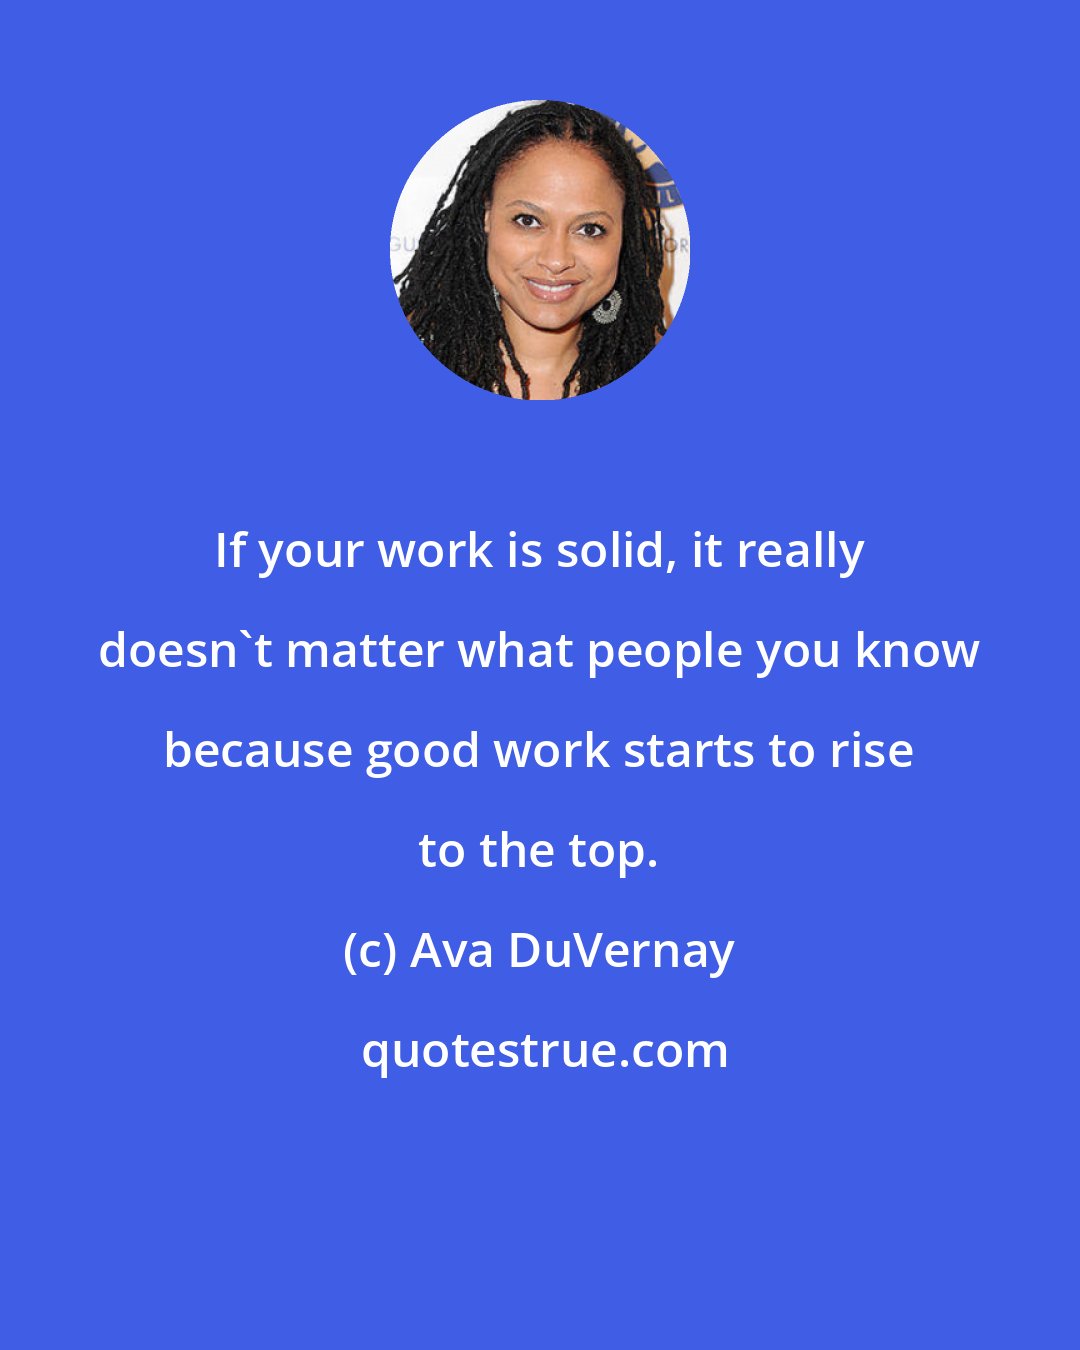 Ava DuVernay: If your work is solid, it really doesn't matter what people you know because good work starts to rise to the top.